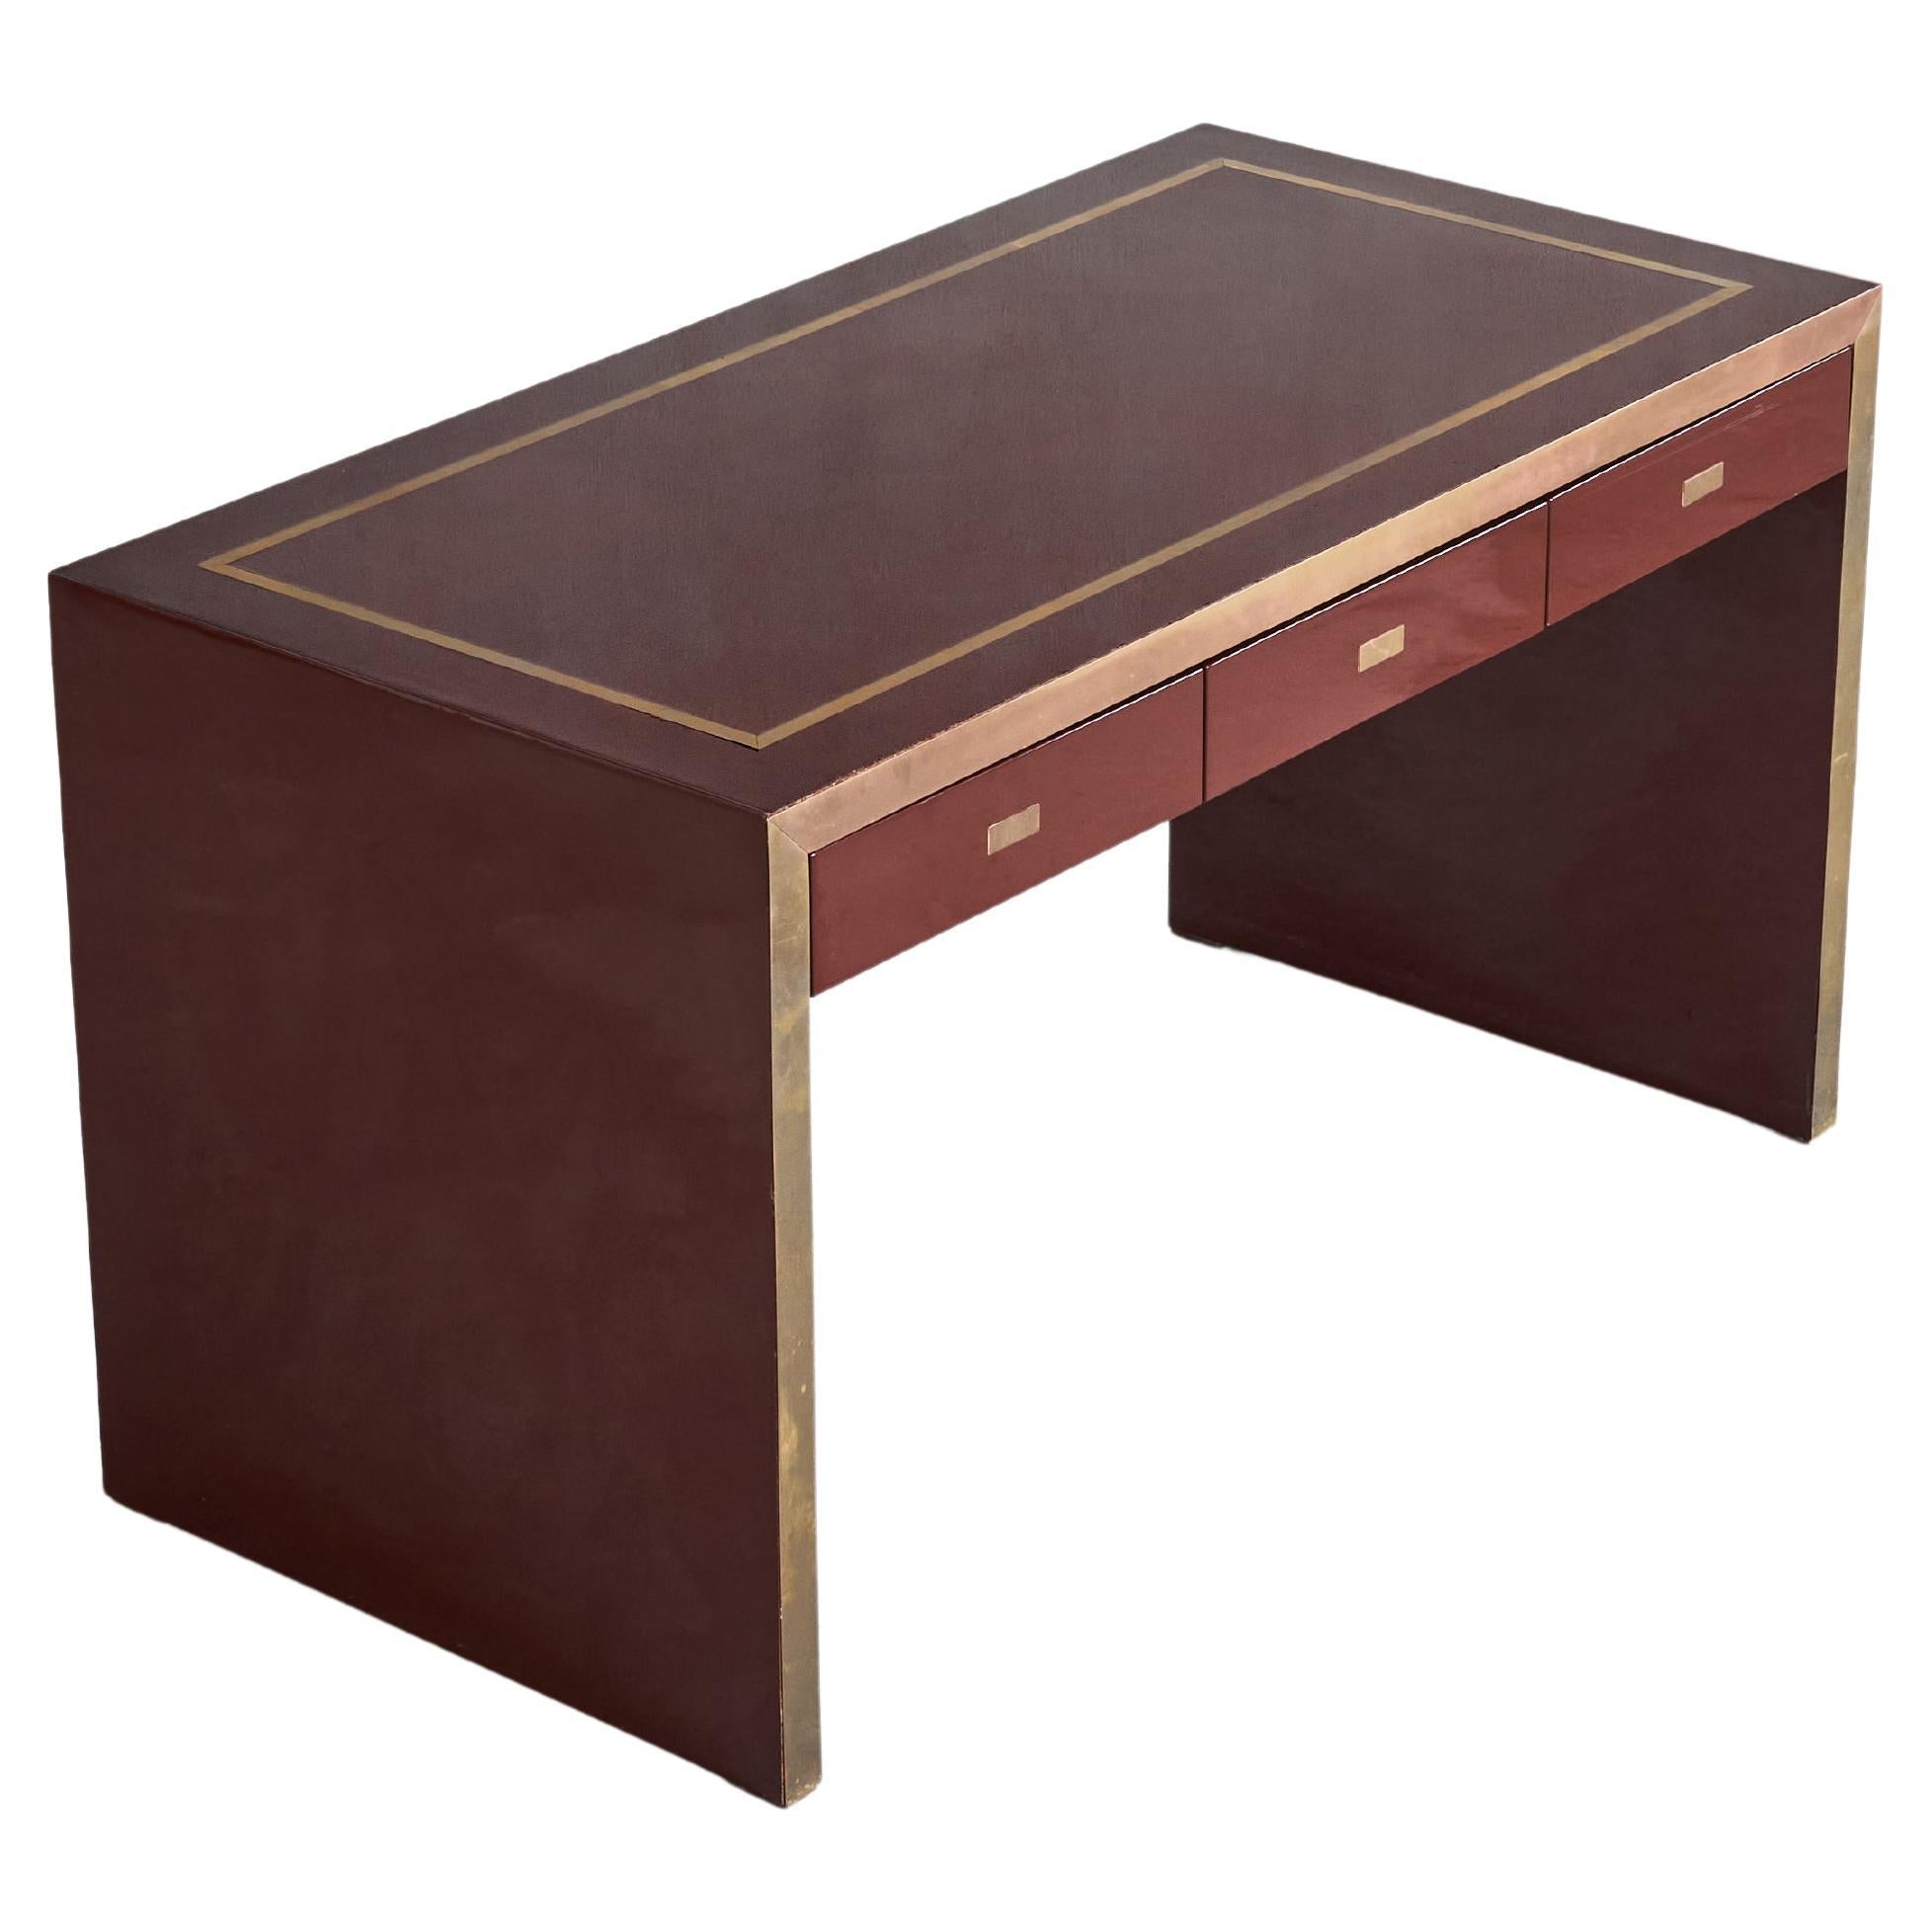 Jean Claude Mahey Desk in Lacquered Wood & Brass, 1970s For Sale